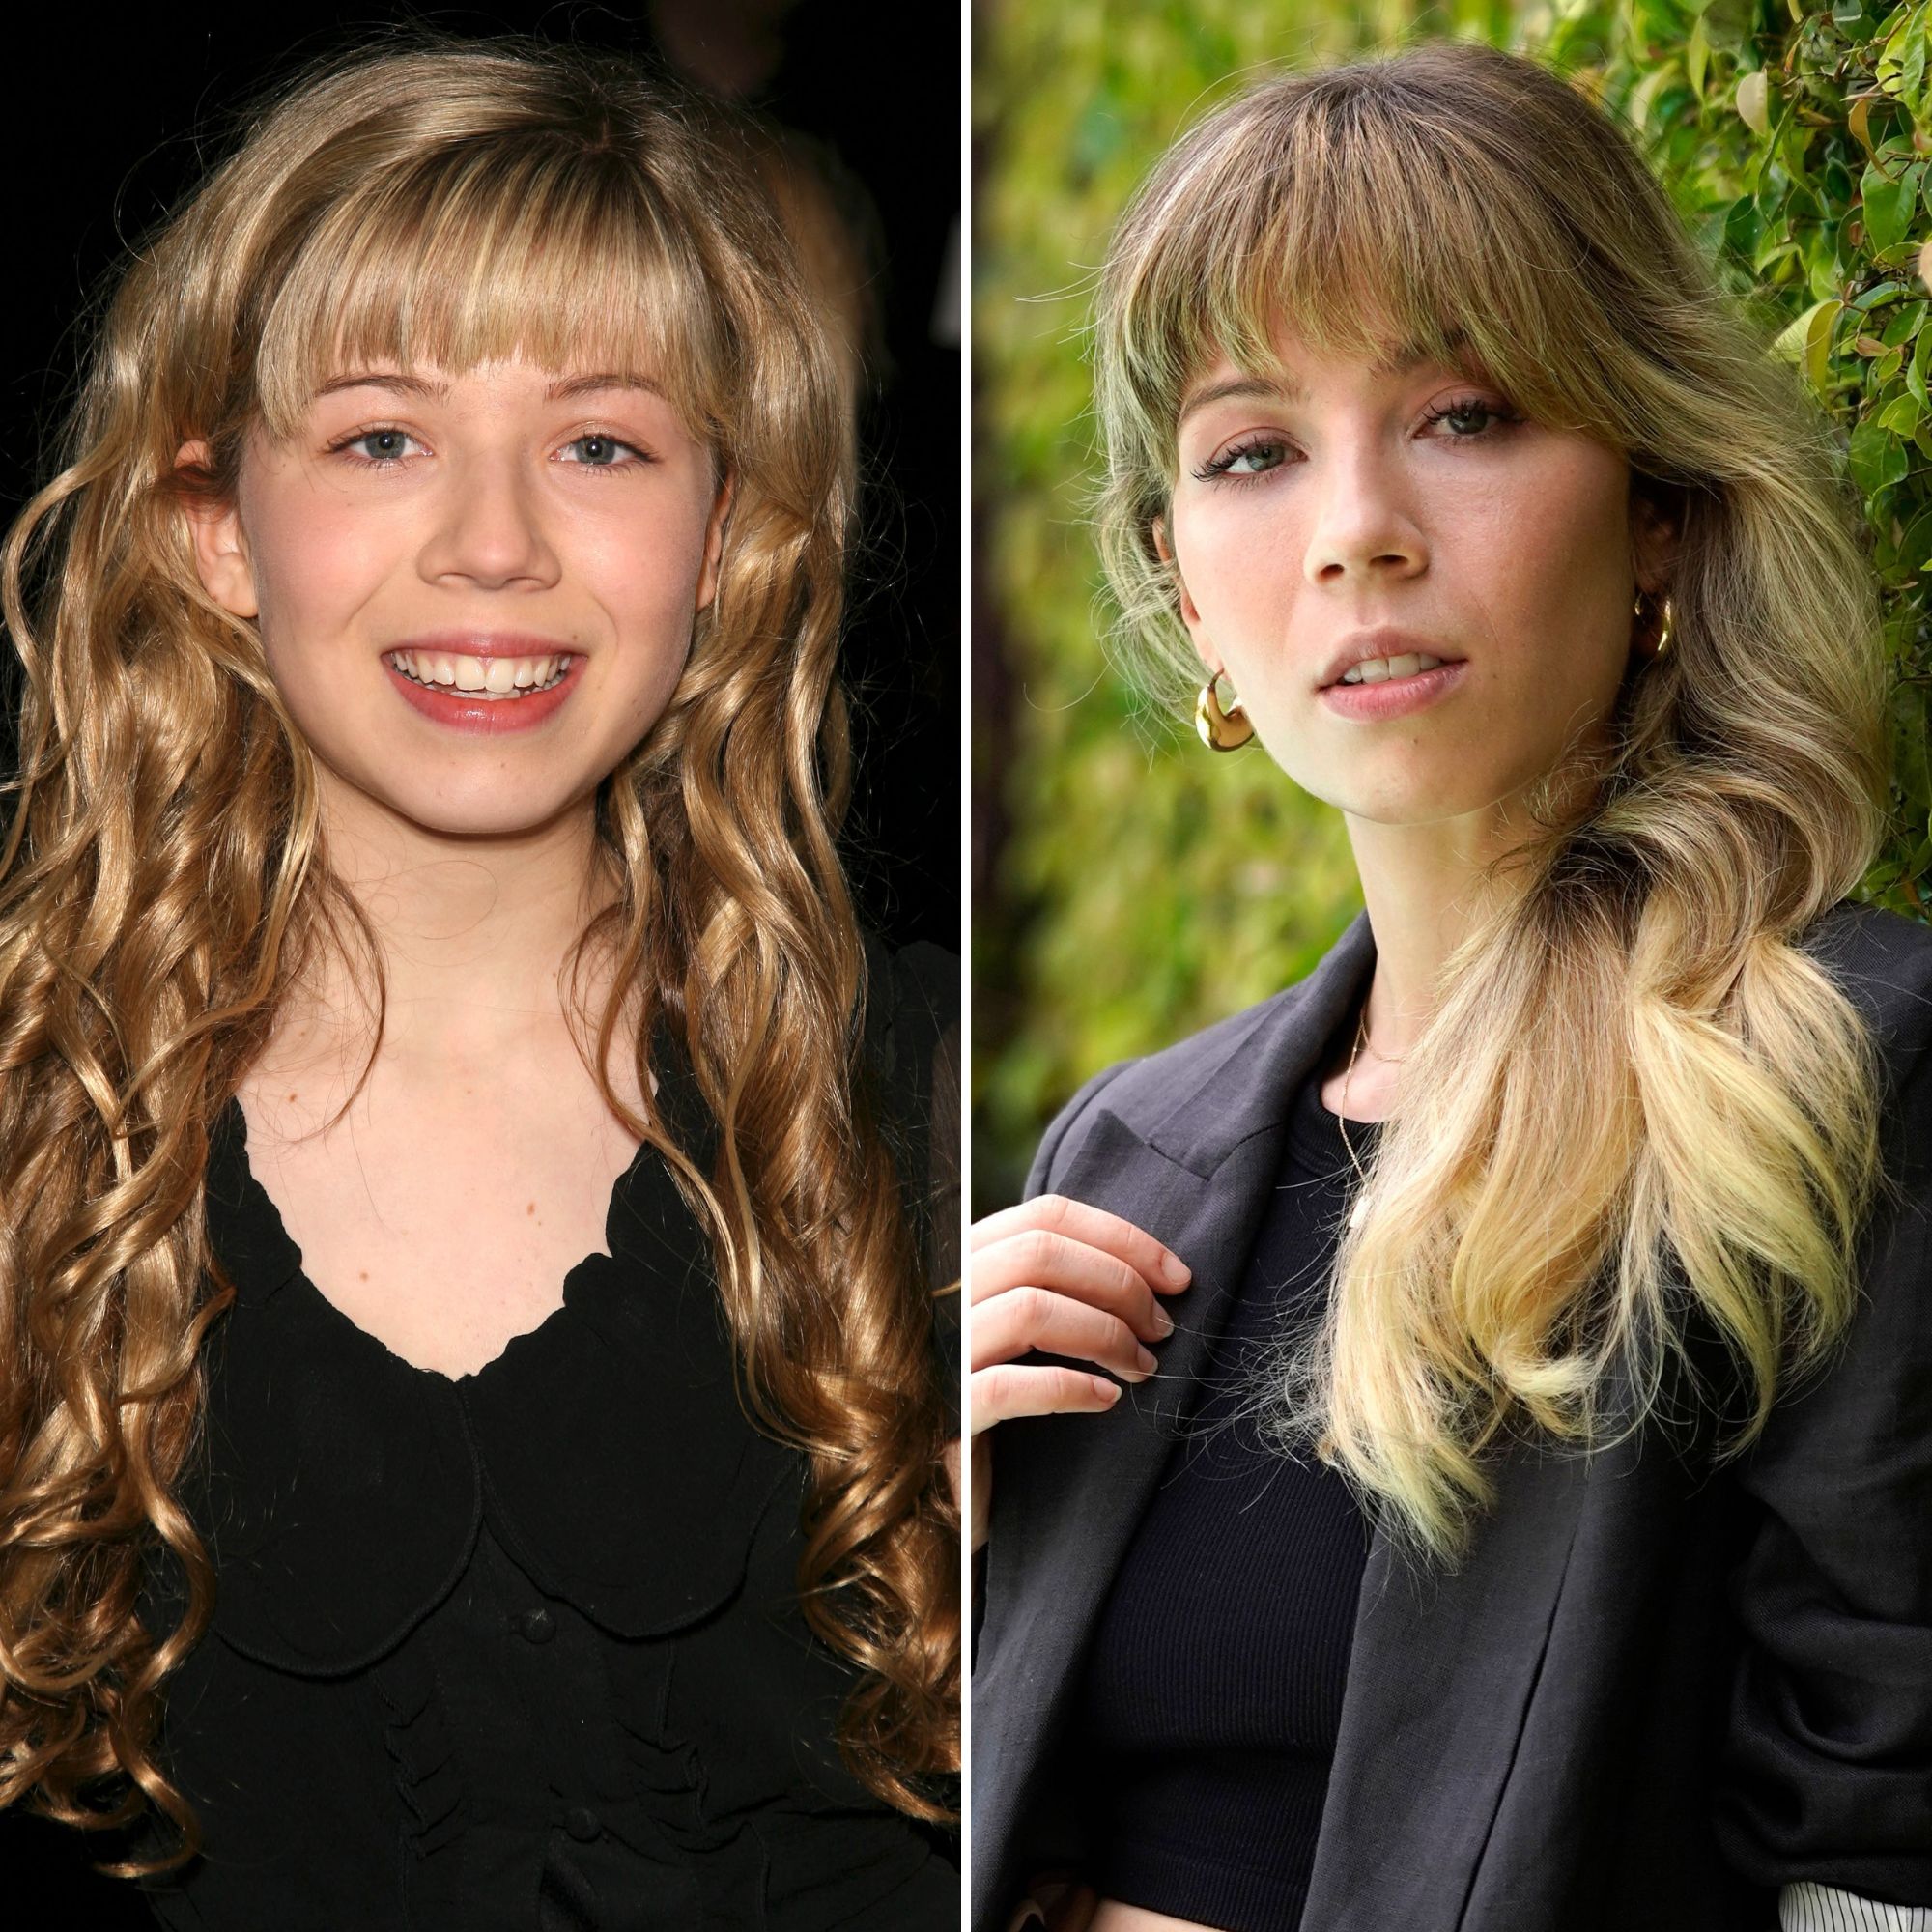 McCurdy Transformation From 'iCarly' to Now Photos